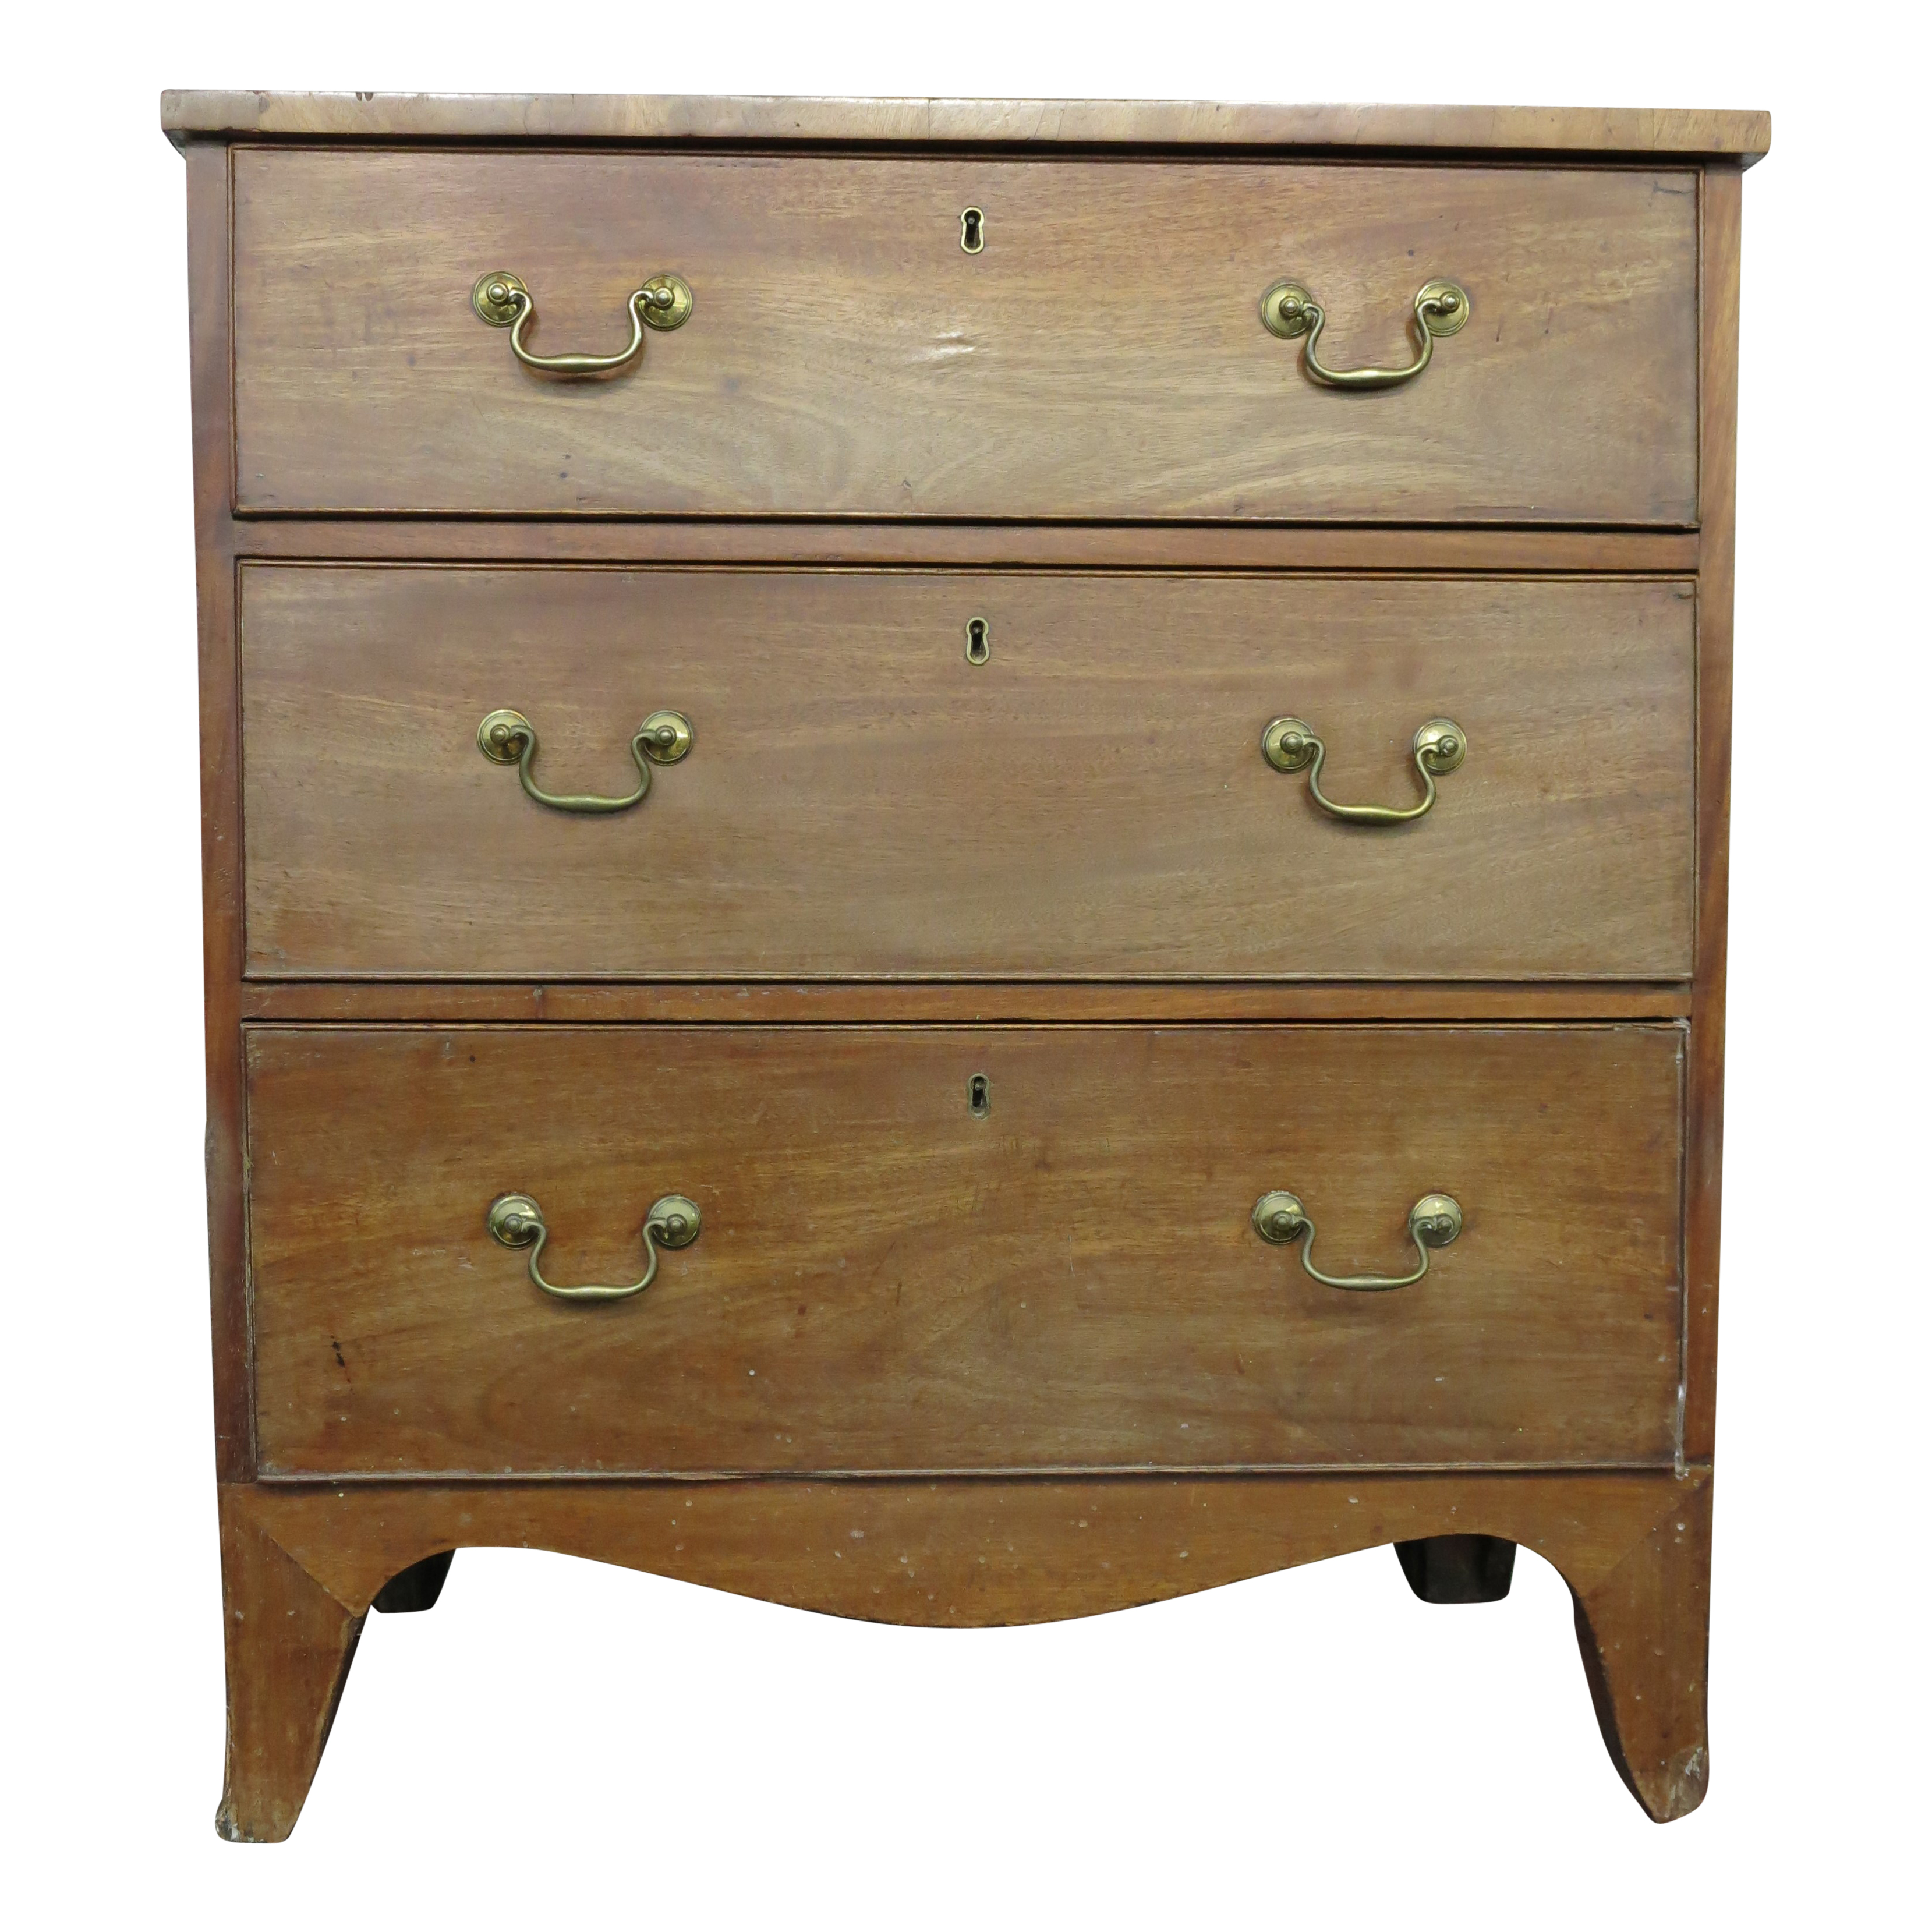 A mahogany chest of drawers, early 19th century, with three long drawers, with splayed bracket feet,